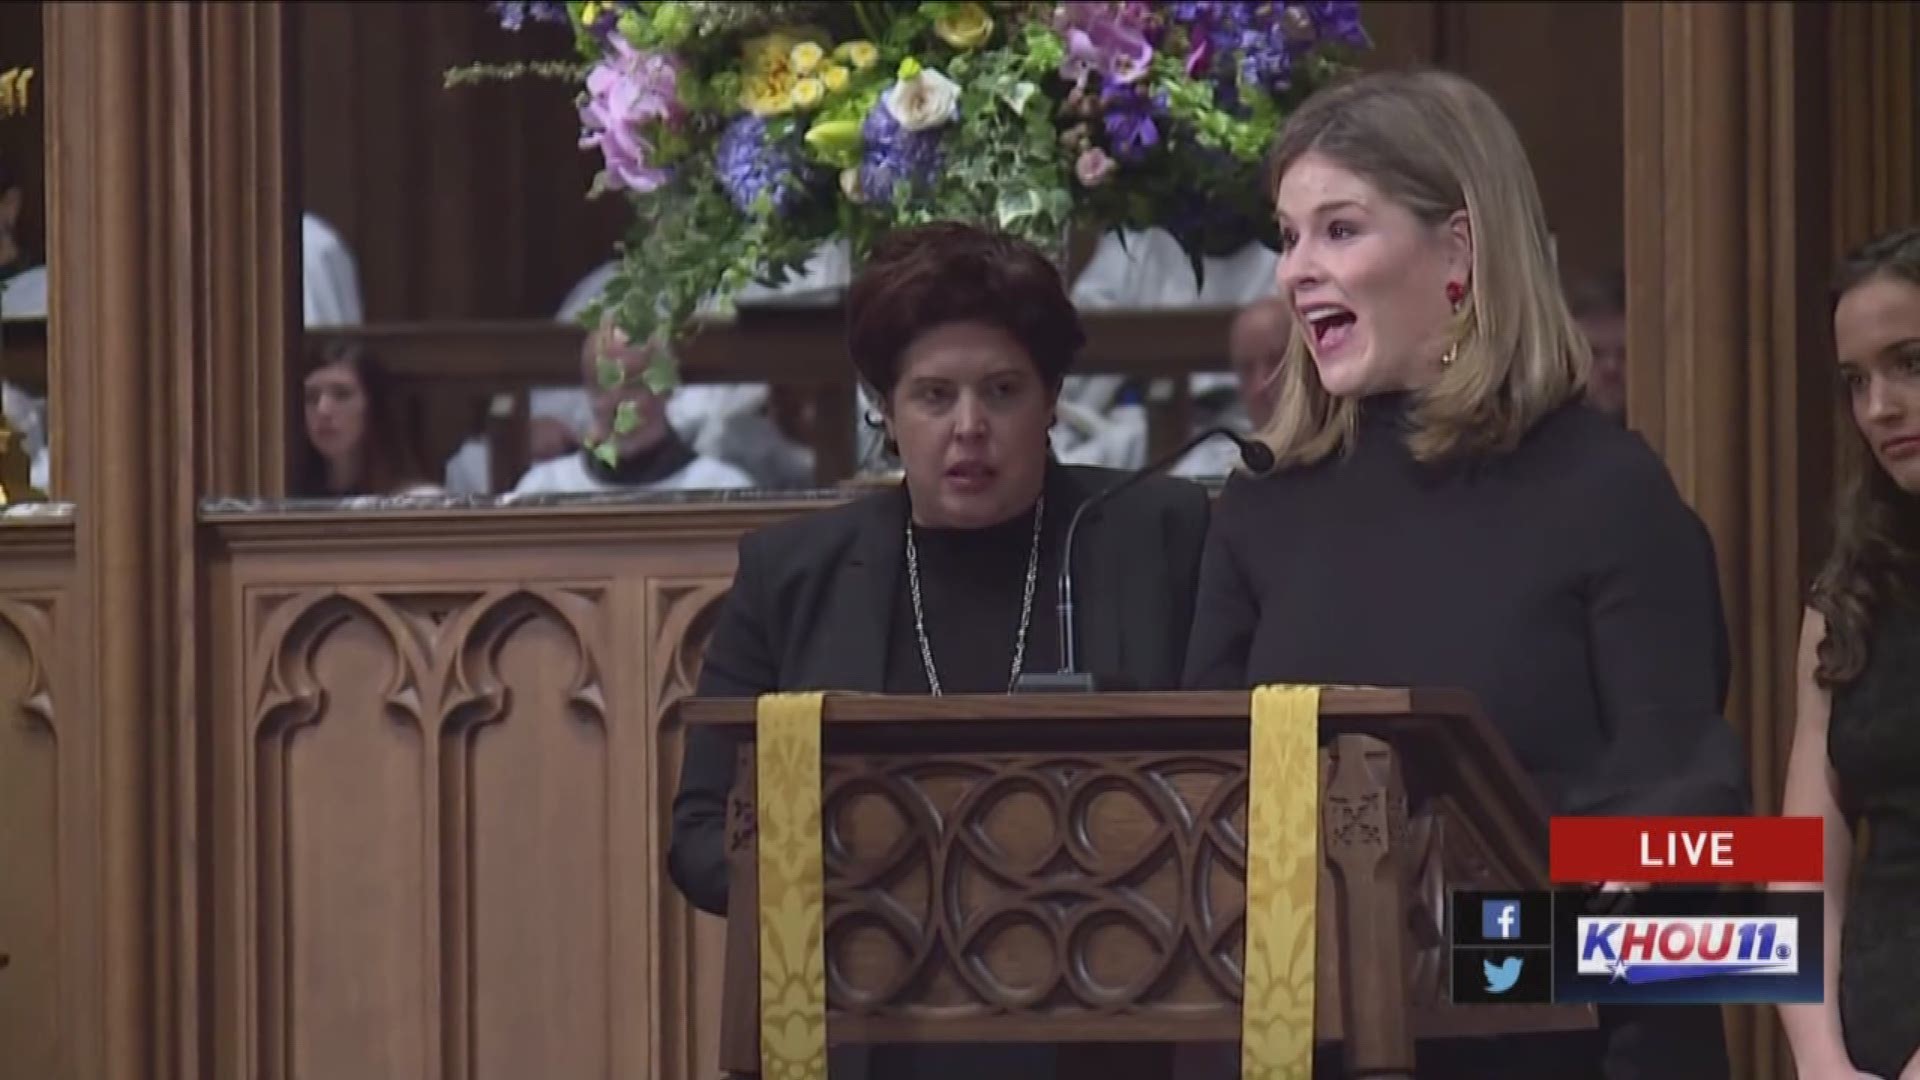 Jenna Bush and other grandchildren honor their grandmother with a reading from Proverbs 31.